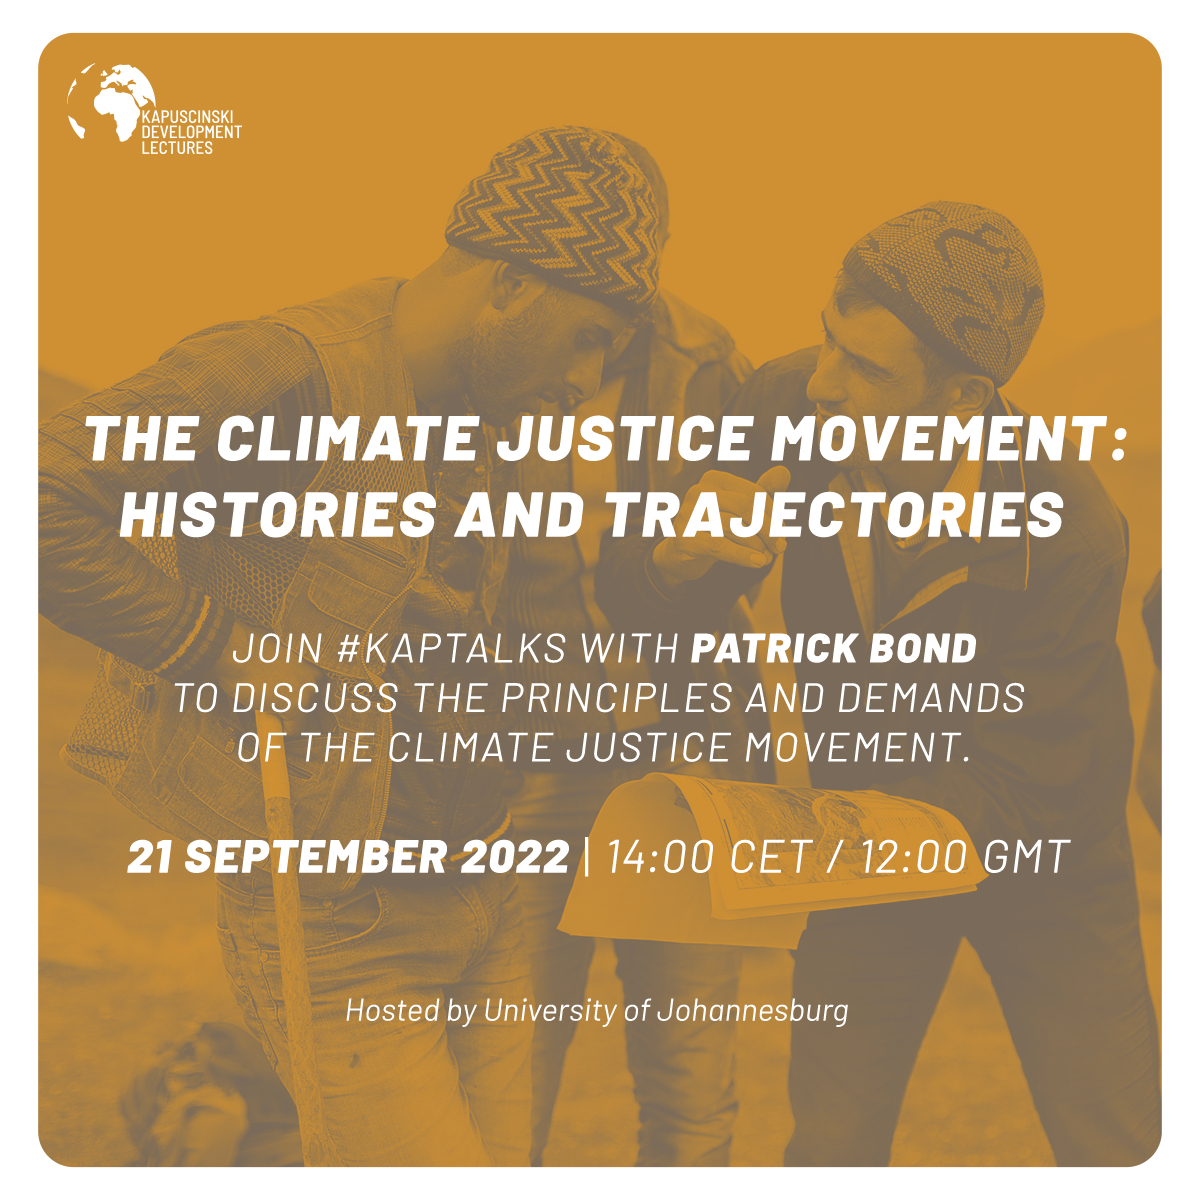 The Climate Justice movement: histories and trajectories